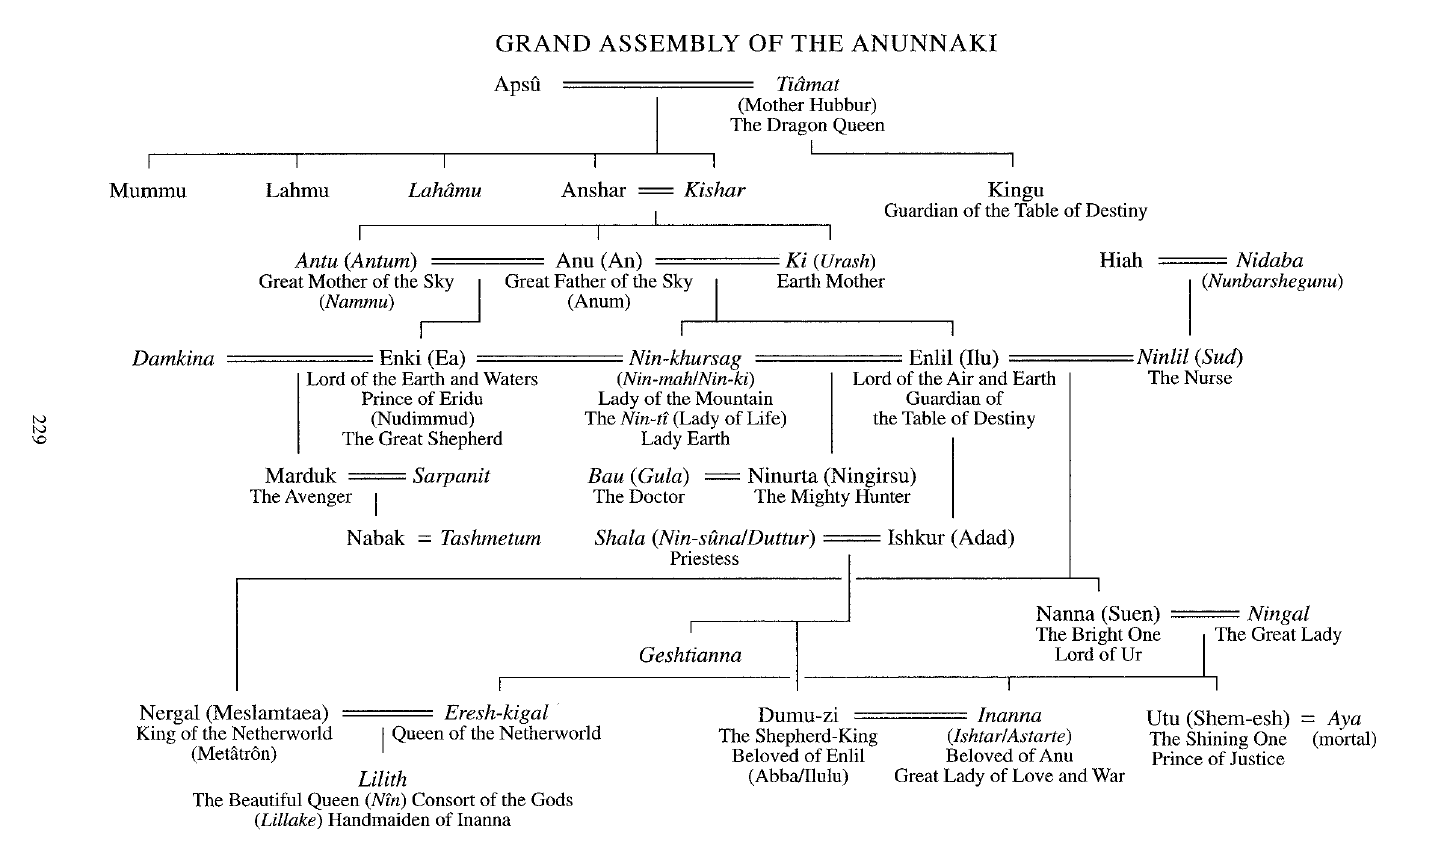 The Family Tree of the Anunnaki – Those Who Came Down from the Heavens  The-Grand-Assembly-of-the-Ancient-Anunnaki